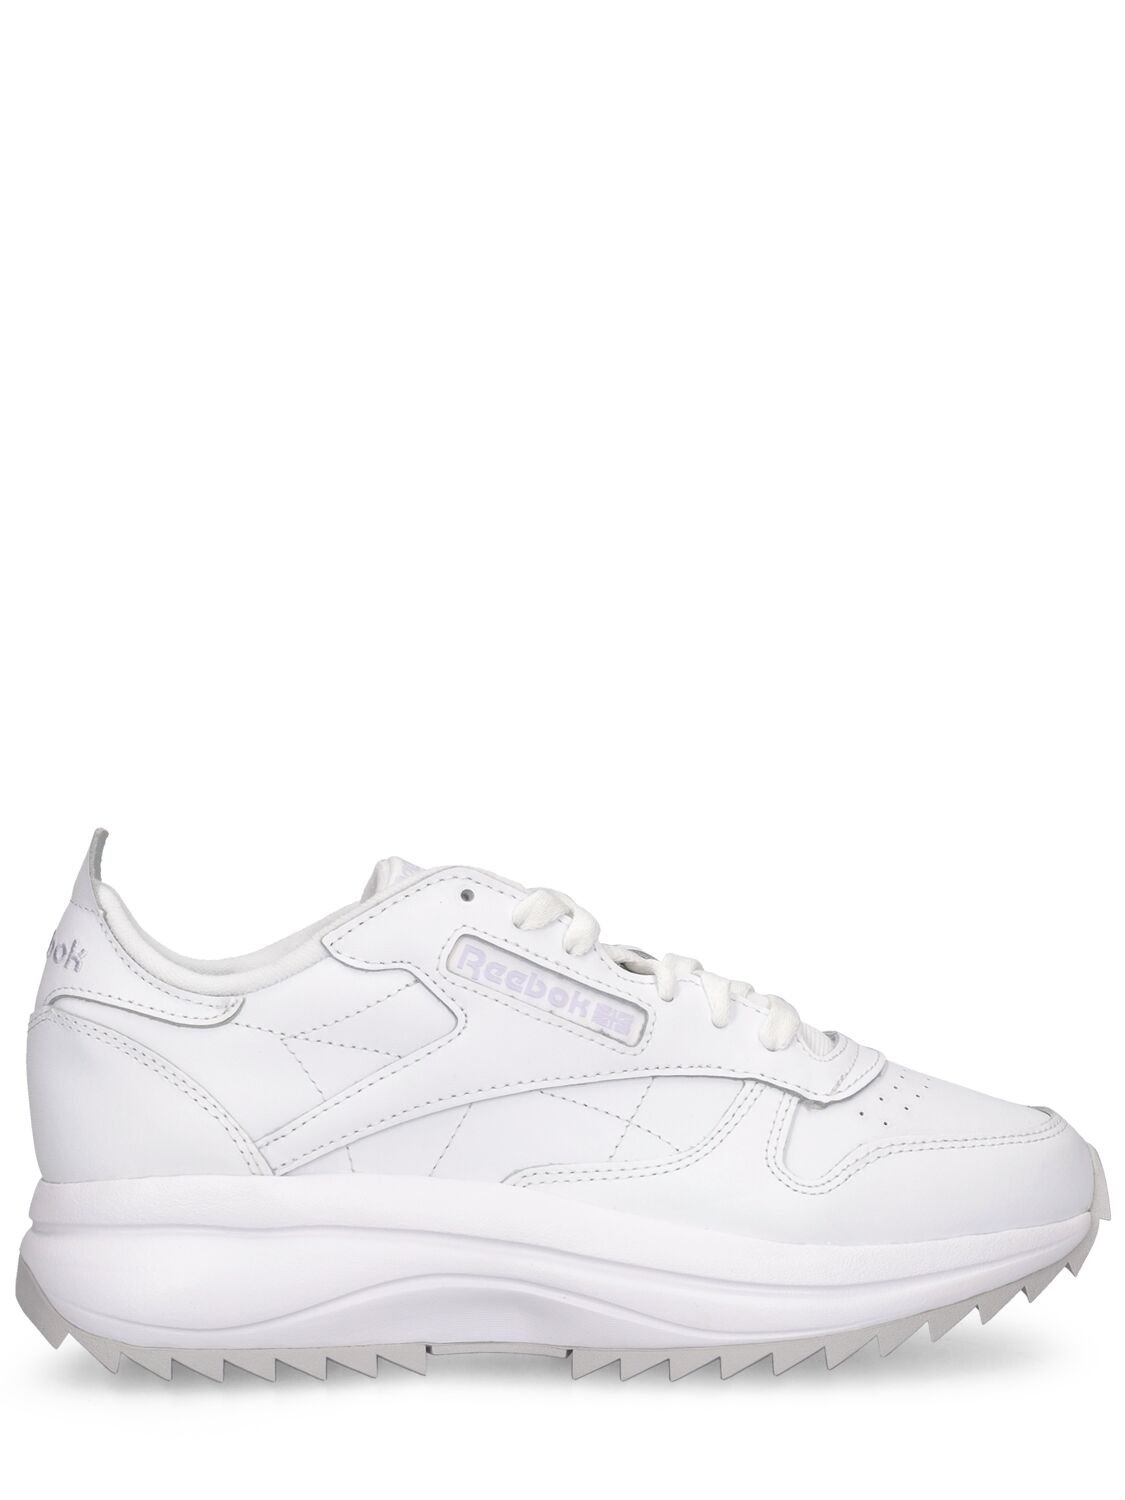 Image of Classic Leather Sp Extra Sneakers